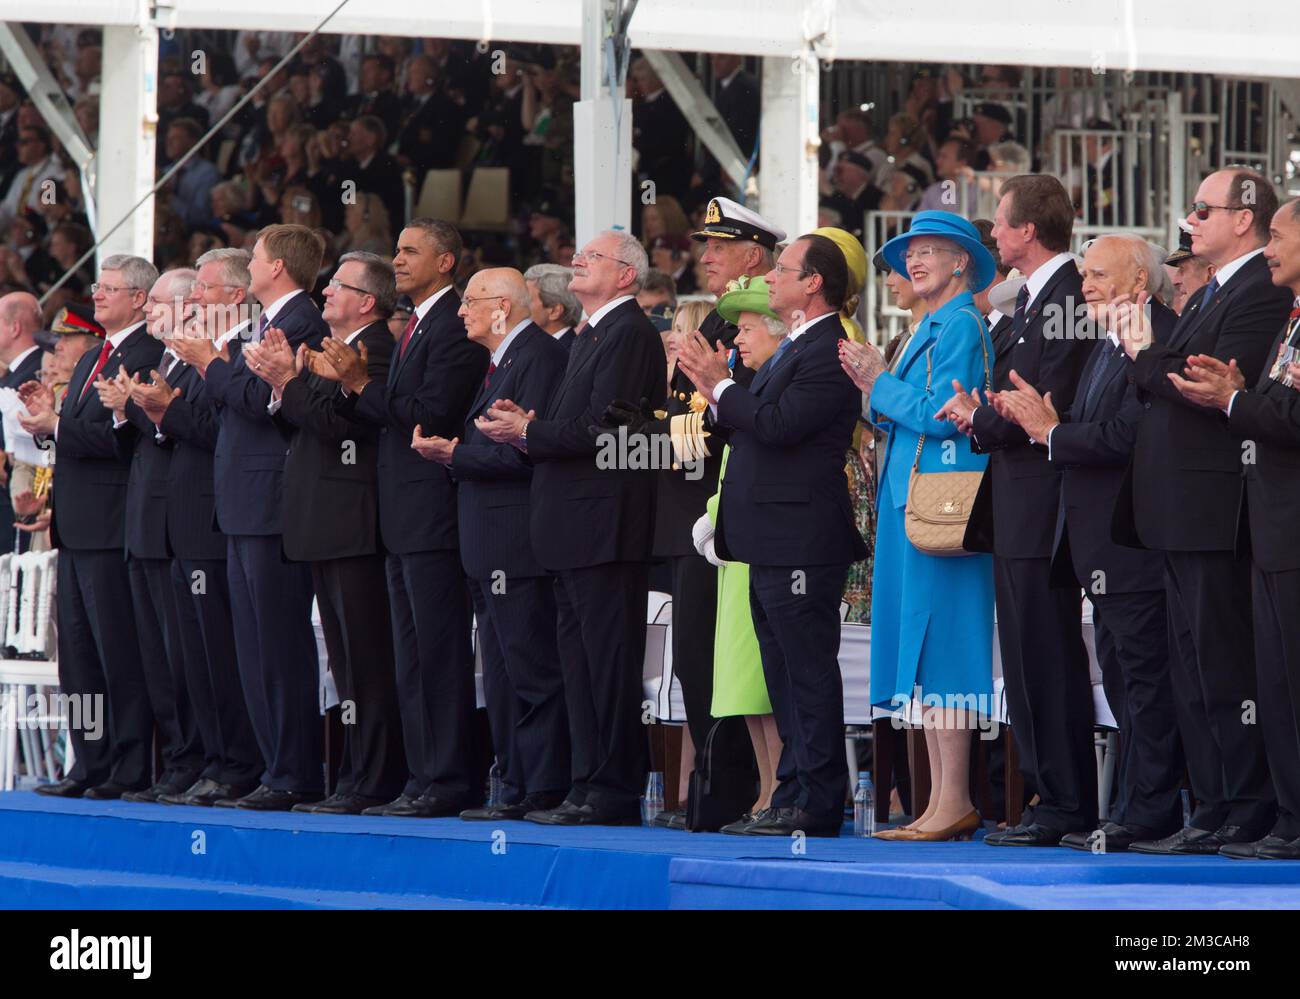 20140606 - OUISTREHAM, FRANCE: Canada's Prime Minister Stephen Harper, European Council president Herman Van Rompuy, King Philippe - Filip of Belgium, Netherland's King Willem-Alexander, Poland's President Bronislaw Komorowski, US President Barack Obama, Italy's President Giorgio Napolitano, Slovakia's president Ivan Gasparovic, Norway's King Harald V, Britain's Queen Elizabeth II, French President Francois Hollande and Danish Queen Margrethe and Luxembourg's Grand Duke Henri attend a ceremony as part of the events marking the 70th anniversary of the World War II Allied landings in Normandy in Stock Photo